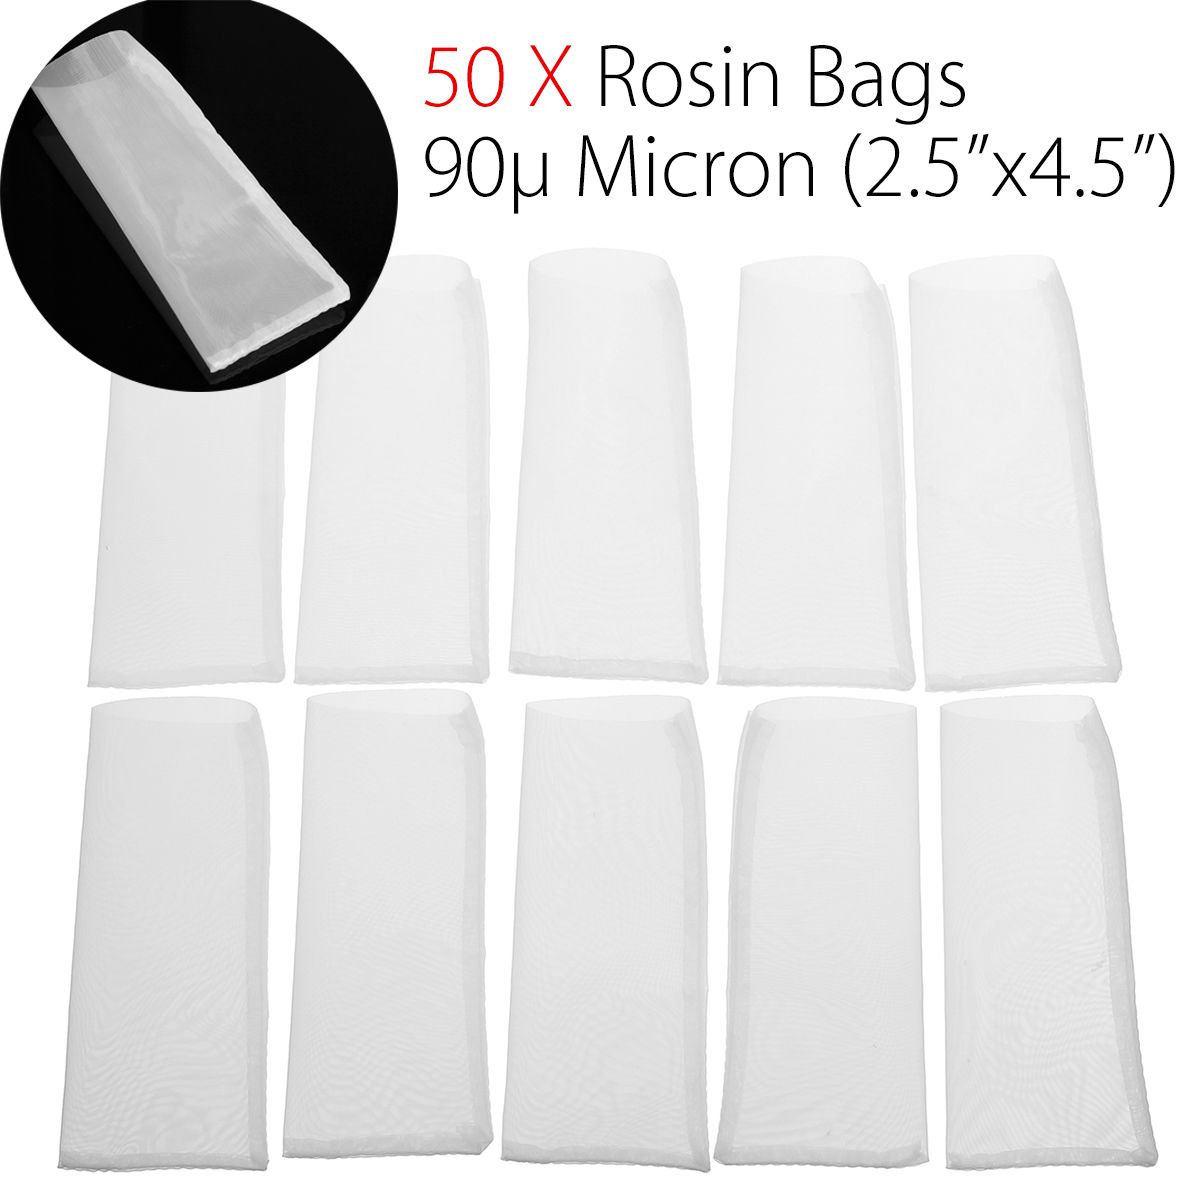 50Pcs-Rosin-Extraction-Screen-Bags-Nylon-Heat-Press-Filter-Bags-25x45-inch-90-Micron-1218678